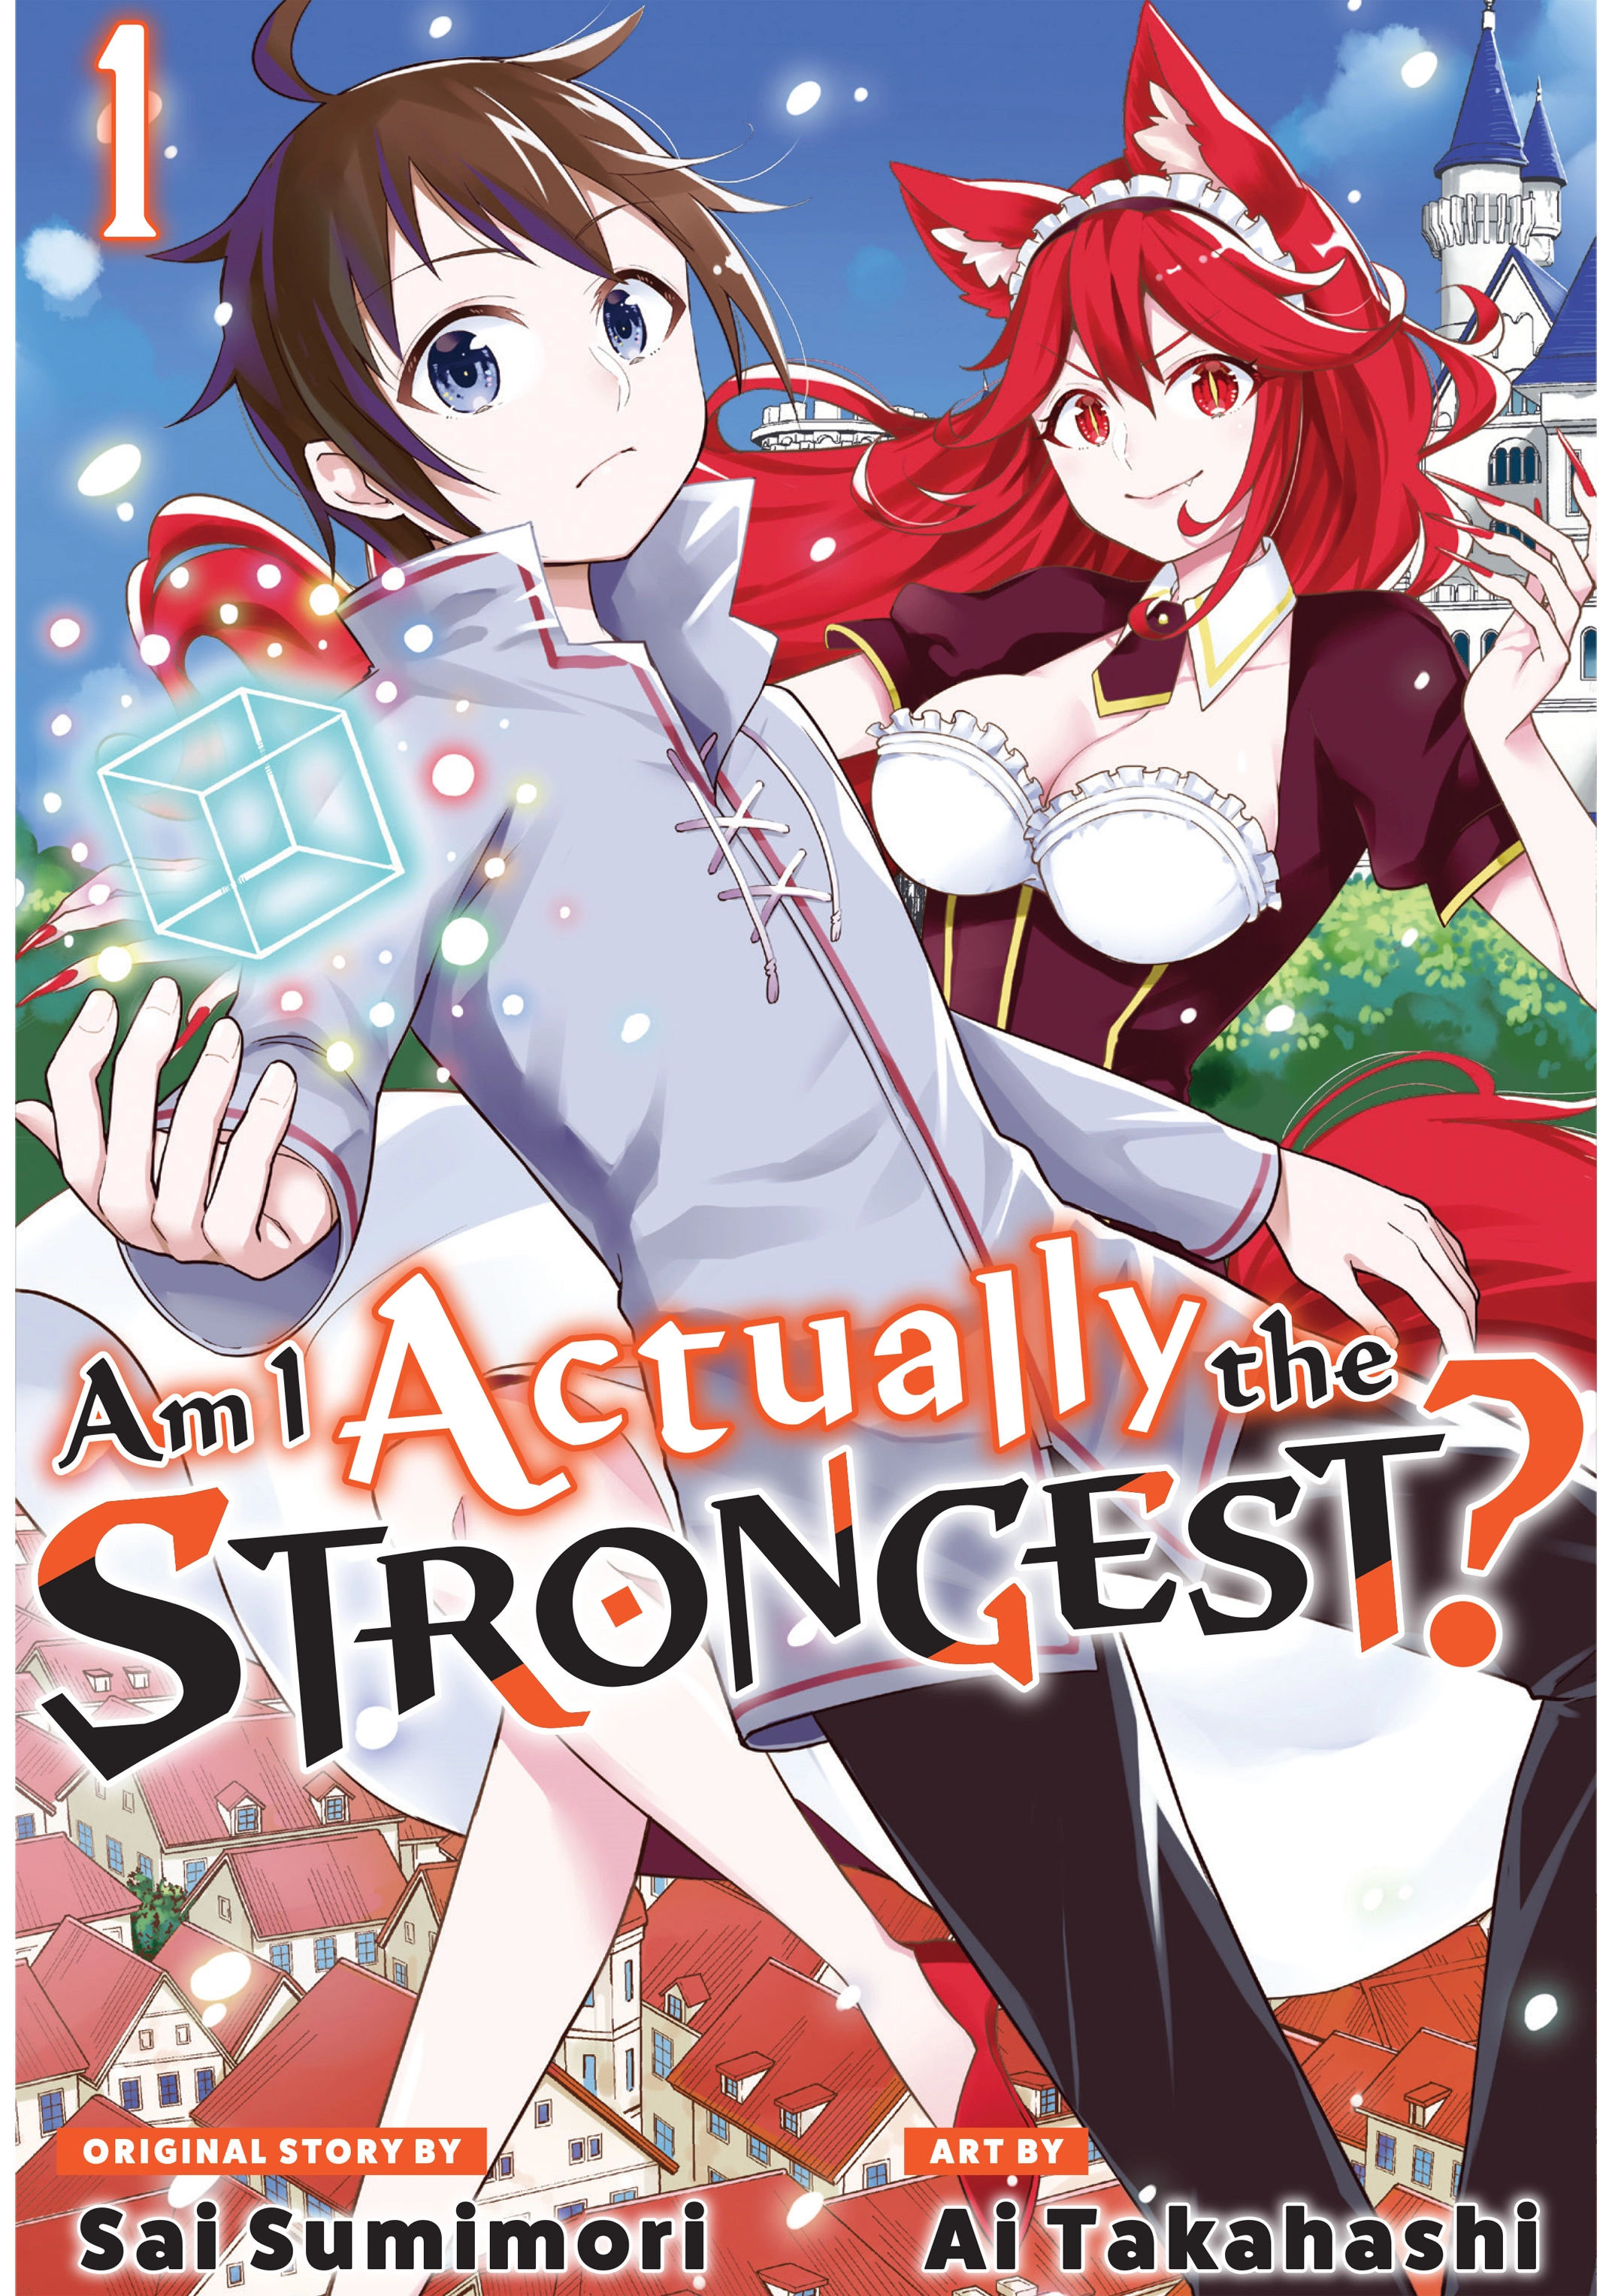 Am I Actually the Strongest? - Wikipedia